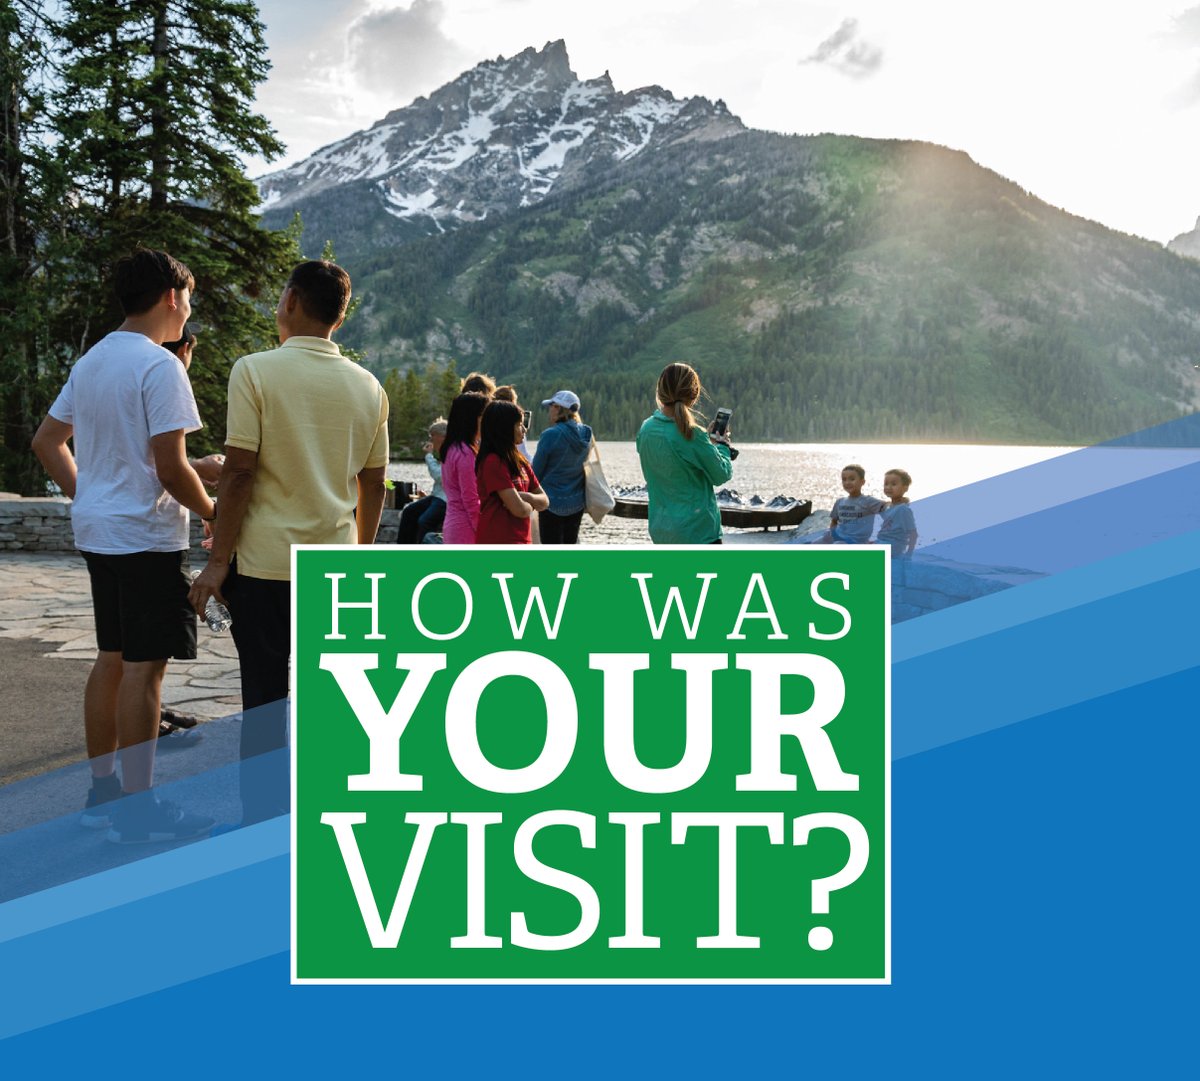 Grand Teton is holding a public meeting to gather info on how visitors use, experience & access the park. Join us to learn about Visitor Use & Experiences Tue, 9/19, 4-6pm (MST) at the Teton County Library Ordway Auditorium in Jackson, WY. Learn more at go.nps.gov/TetonVUE.